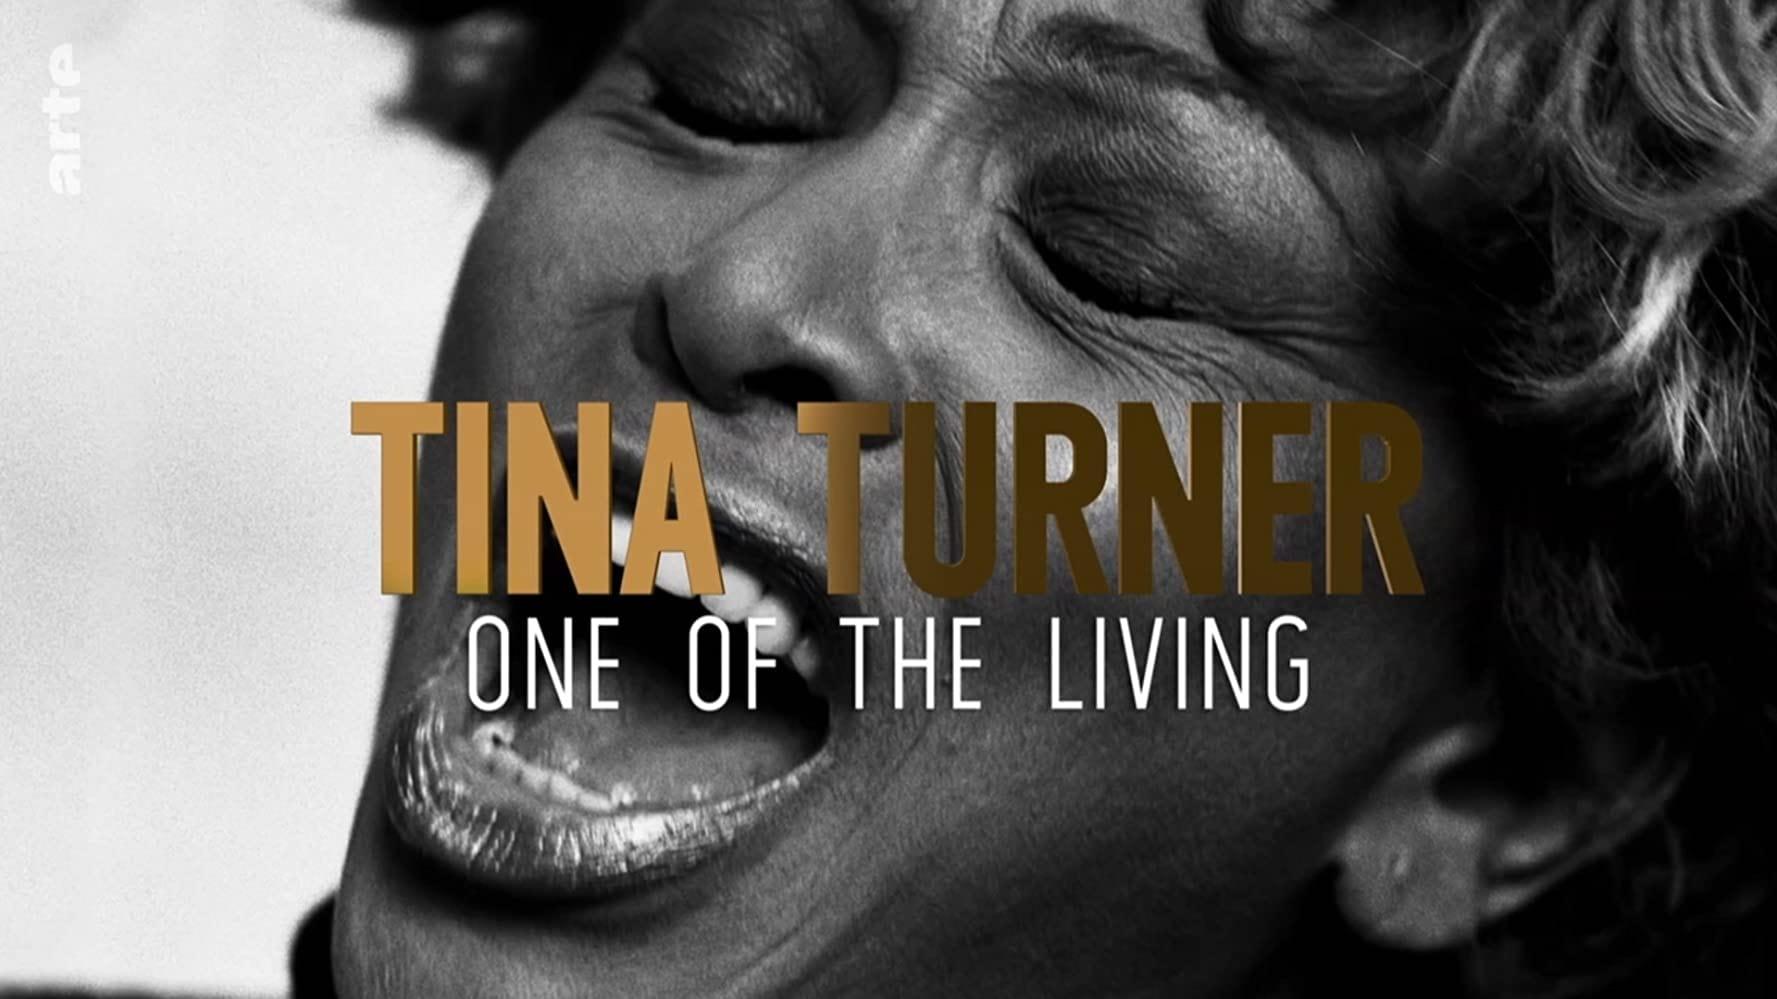 Tina Turner: One of the Living backdrop